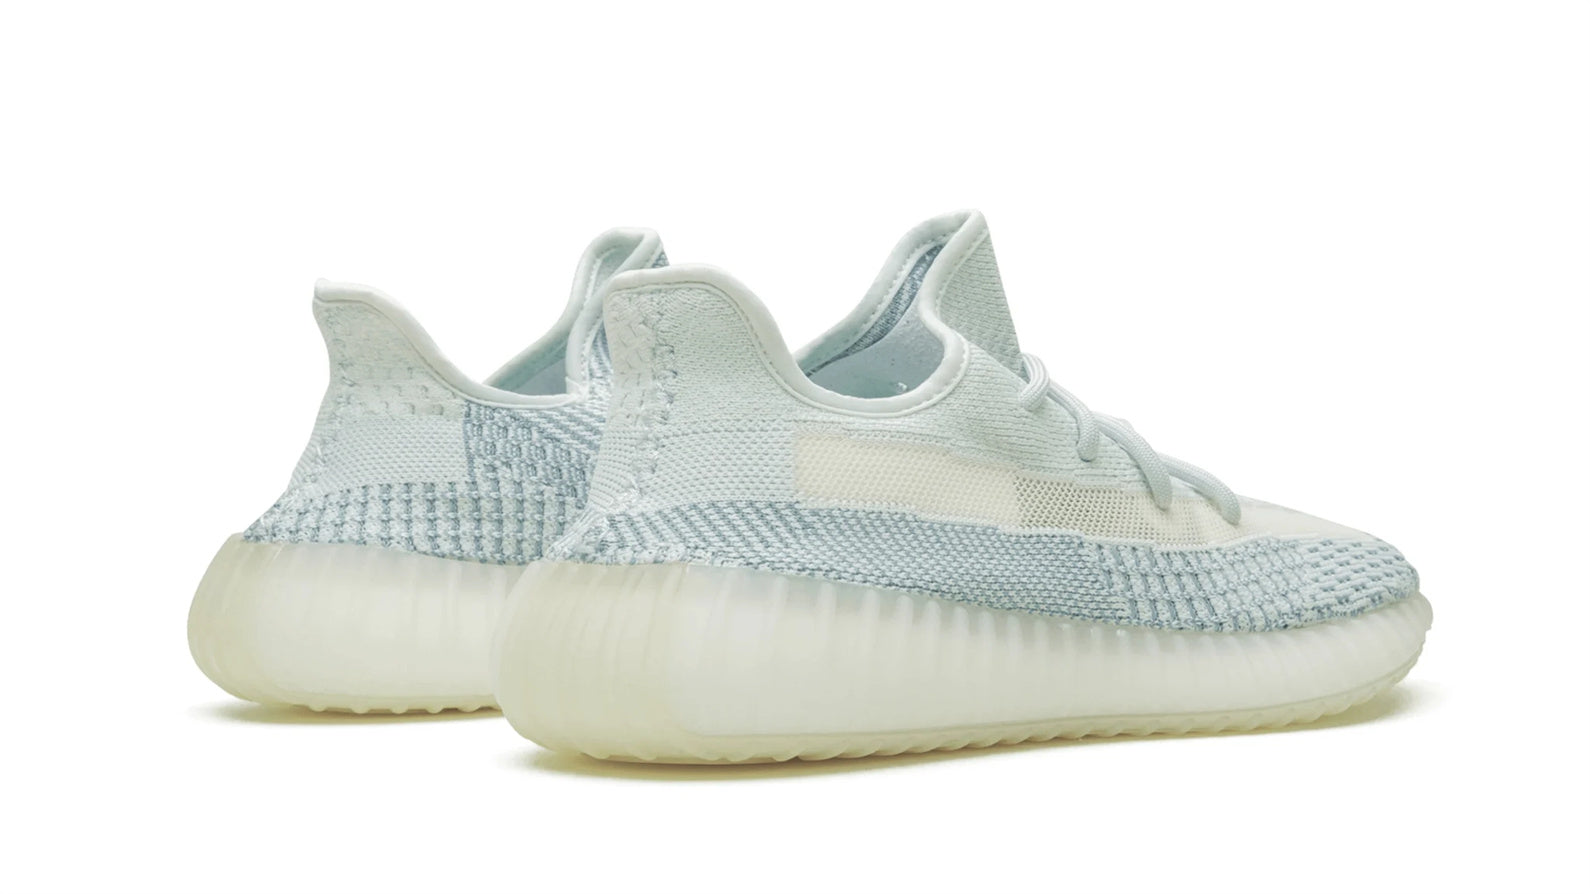 Yeezy Boost 350 V2 Cloud White Reflective – FW5317